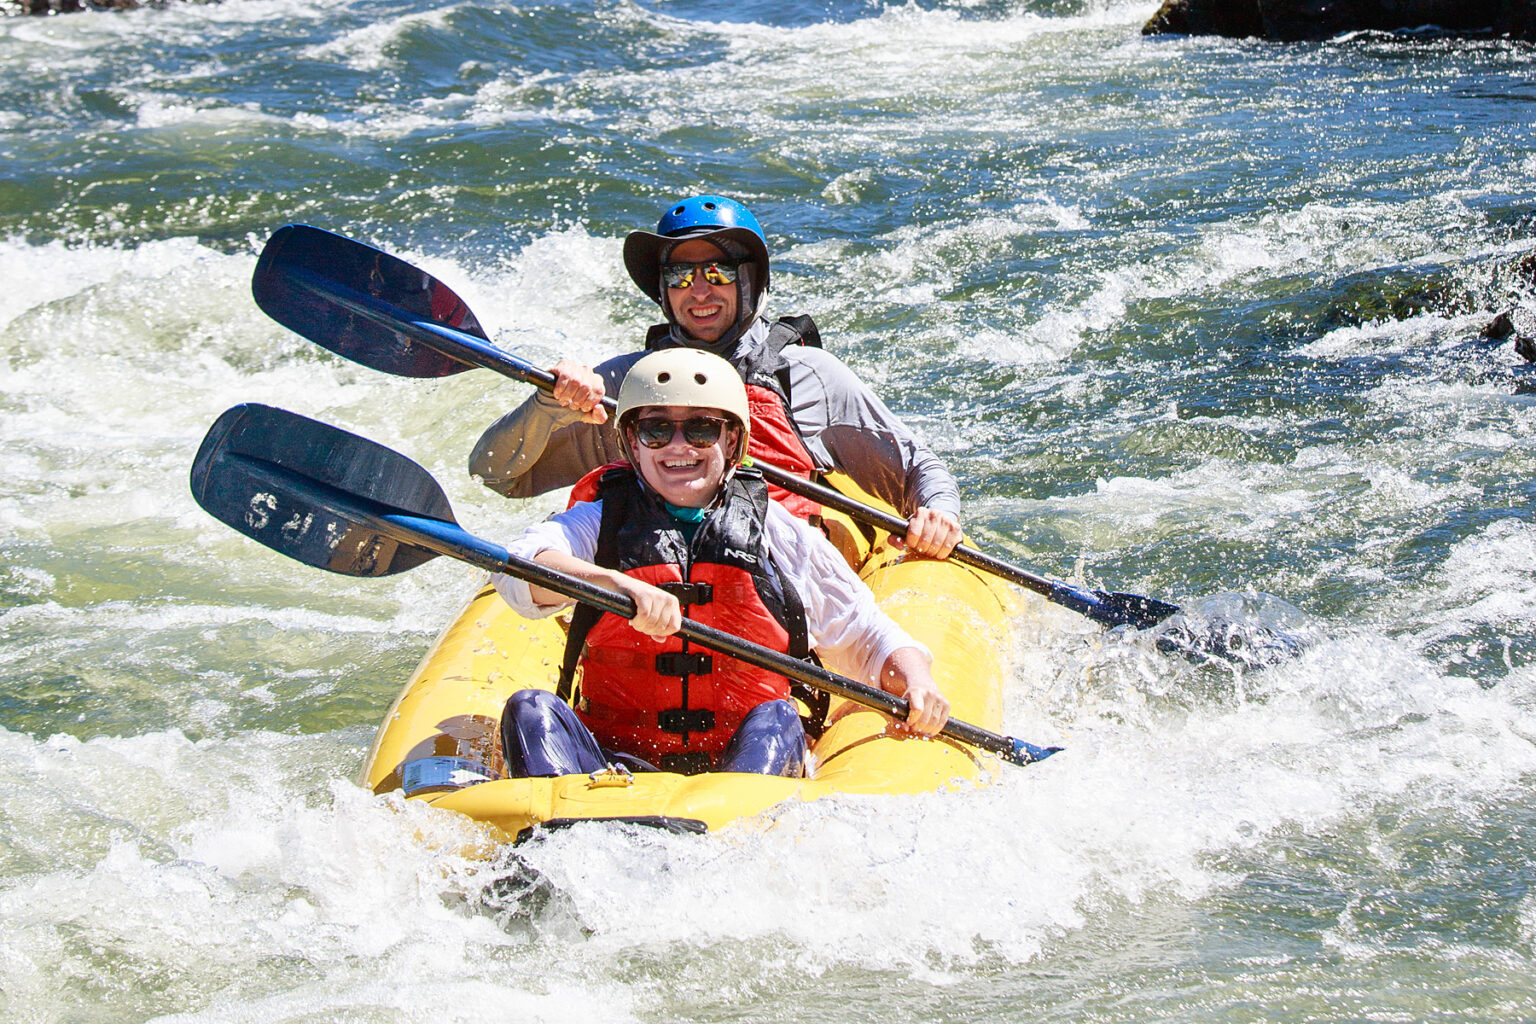 Helmeted duo smile for the camera as they paddle their yellow inflatable kayak through light rapids on the Rogue River